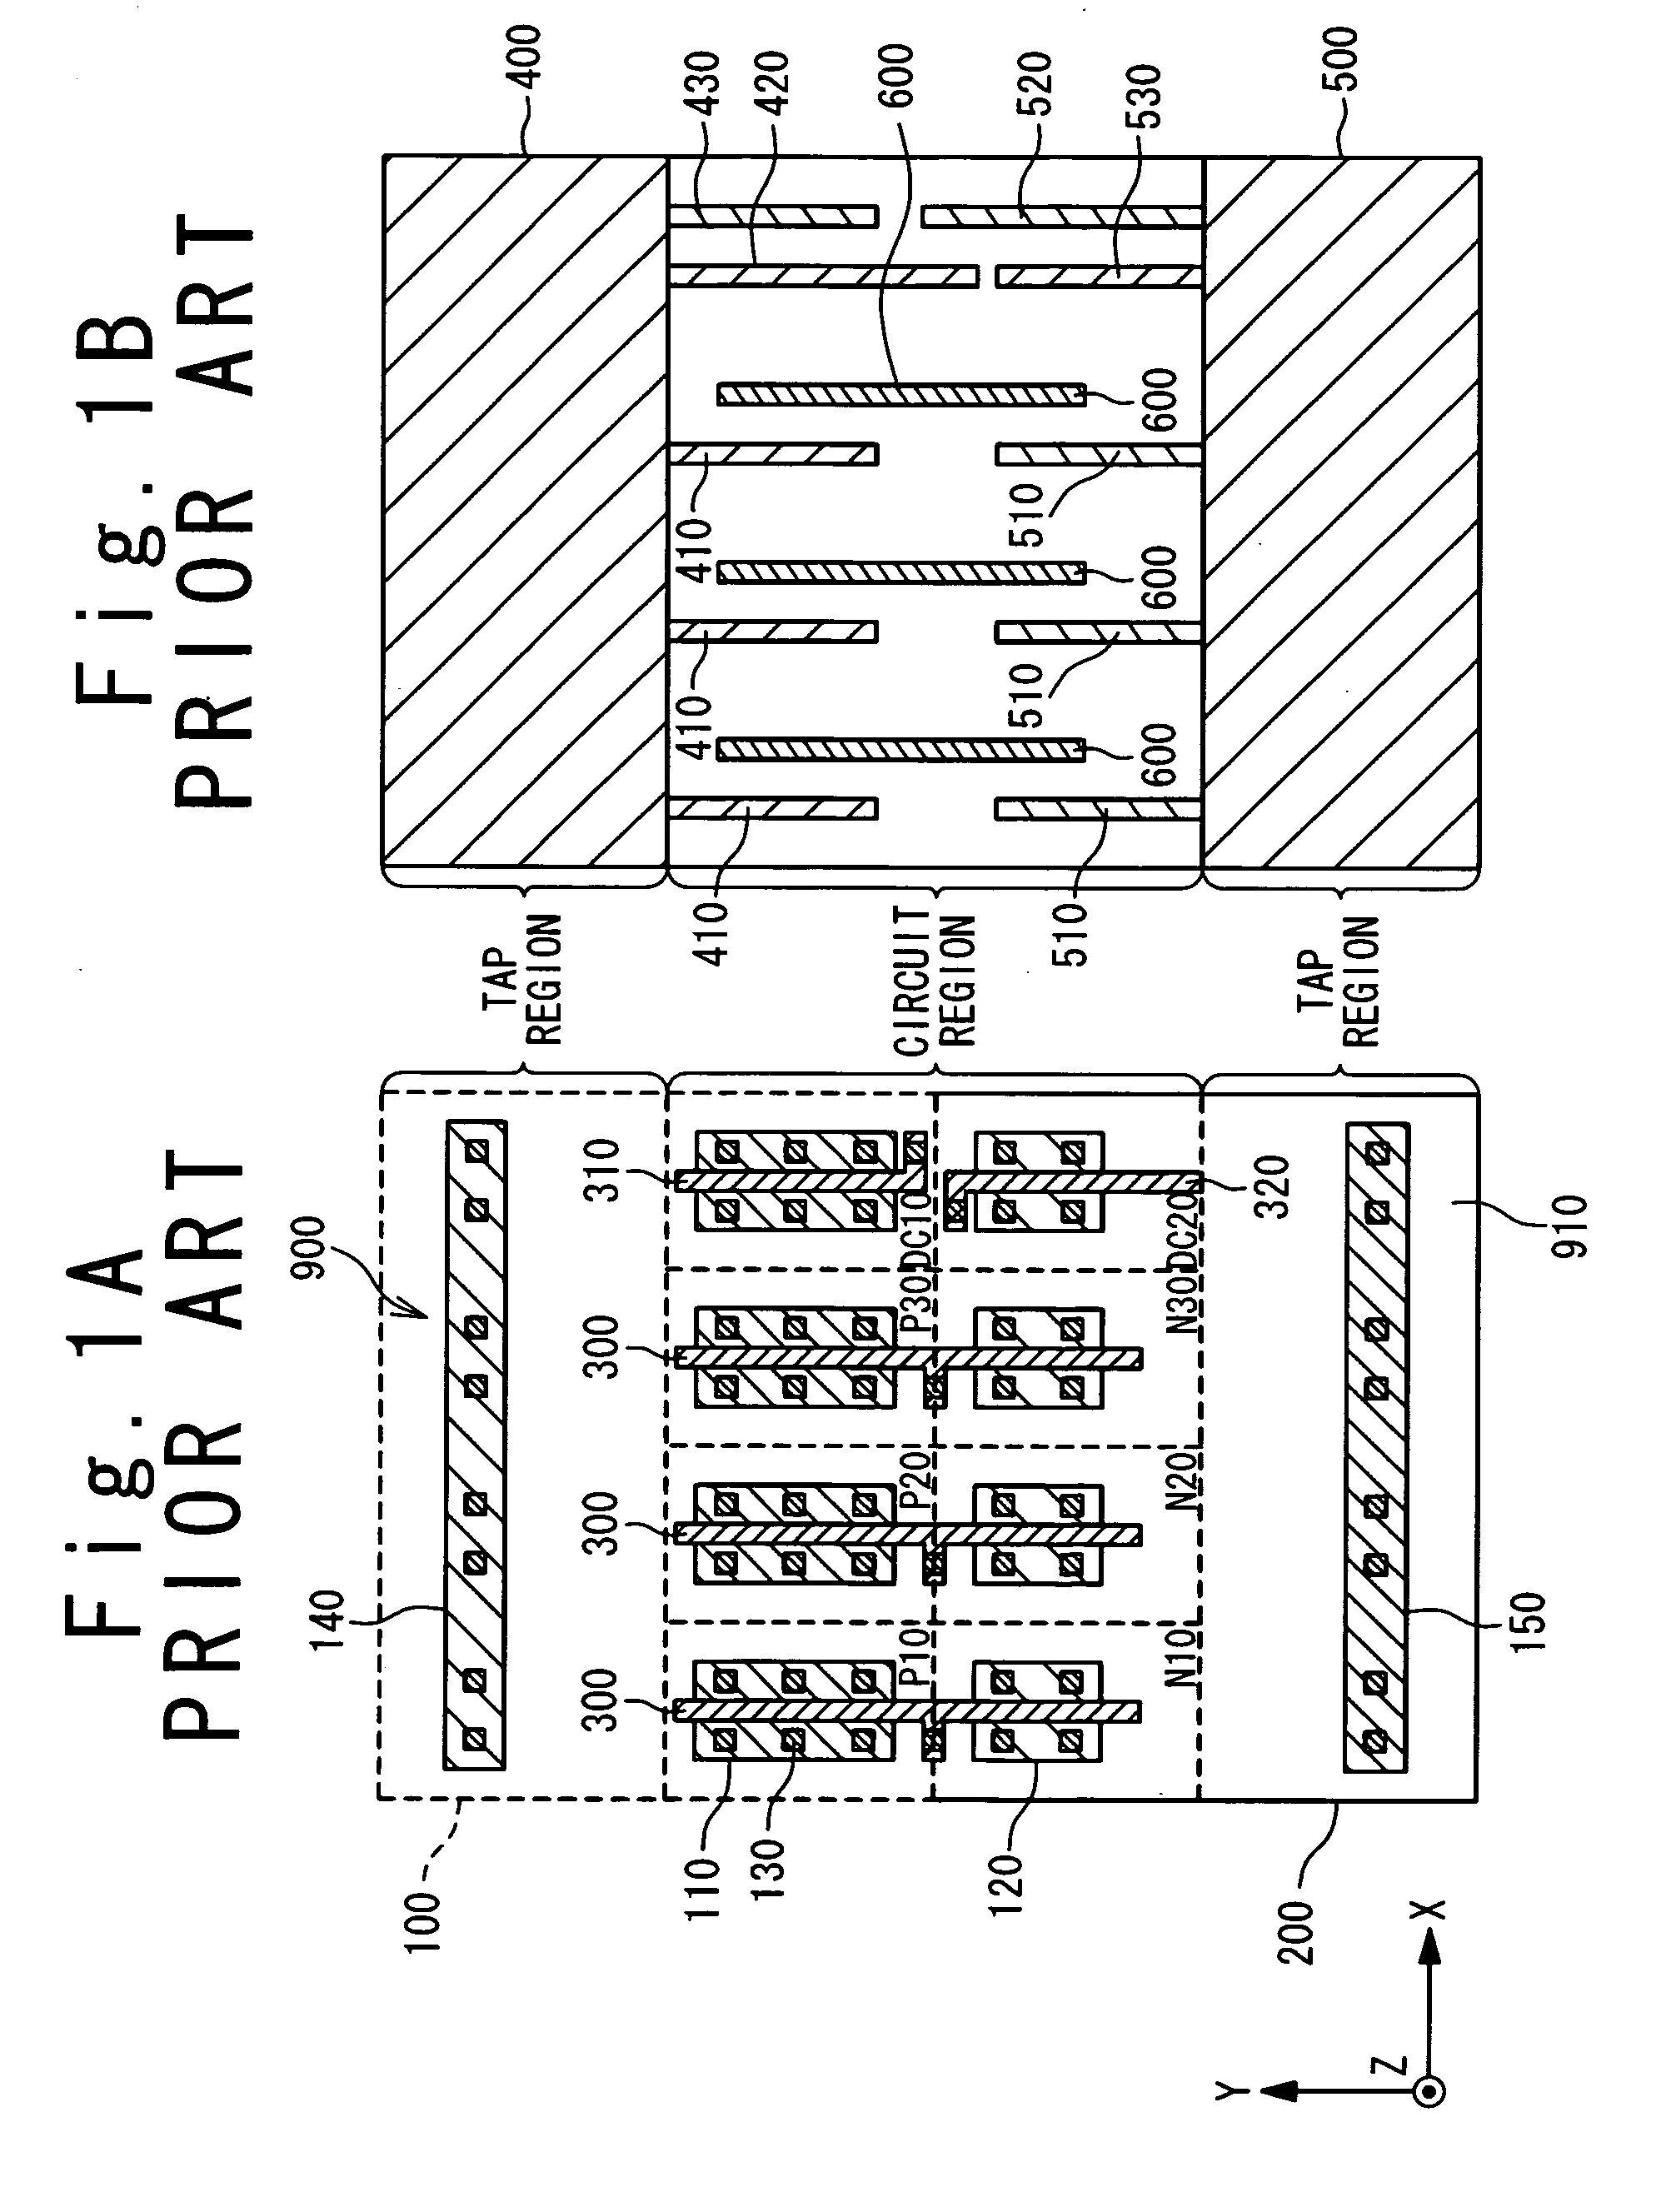 Integrated circuit incorporating decoupling capacitor under power and ground lines